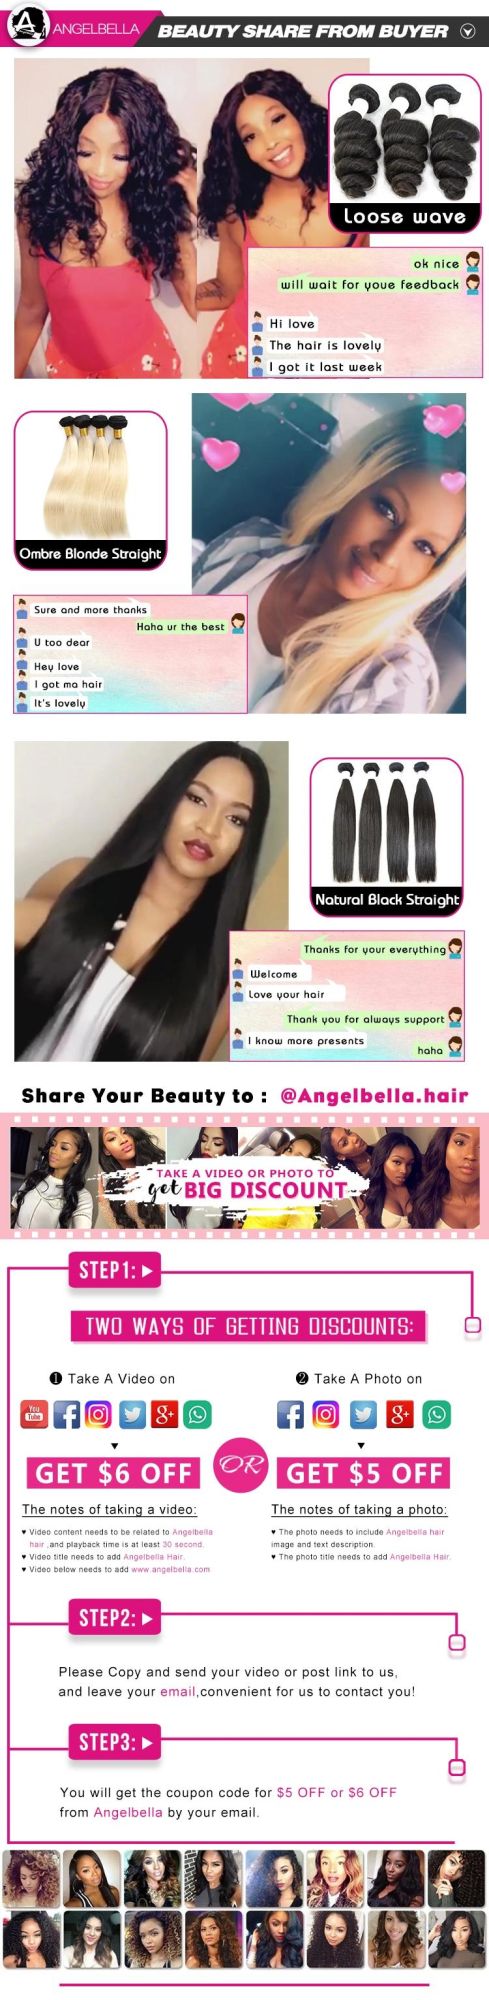 Angelbella Free Part 13X4 100% Raw Indian Human Hair Body Wave Lace Frontal with Baby Hair